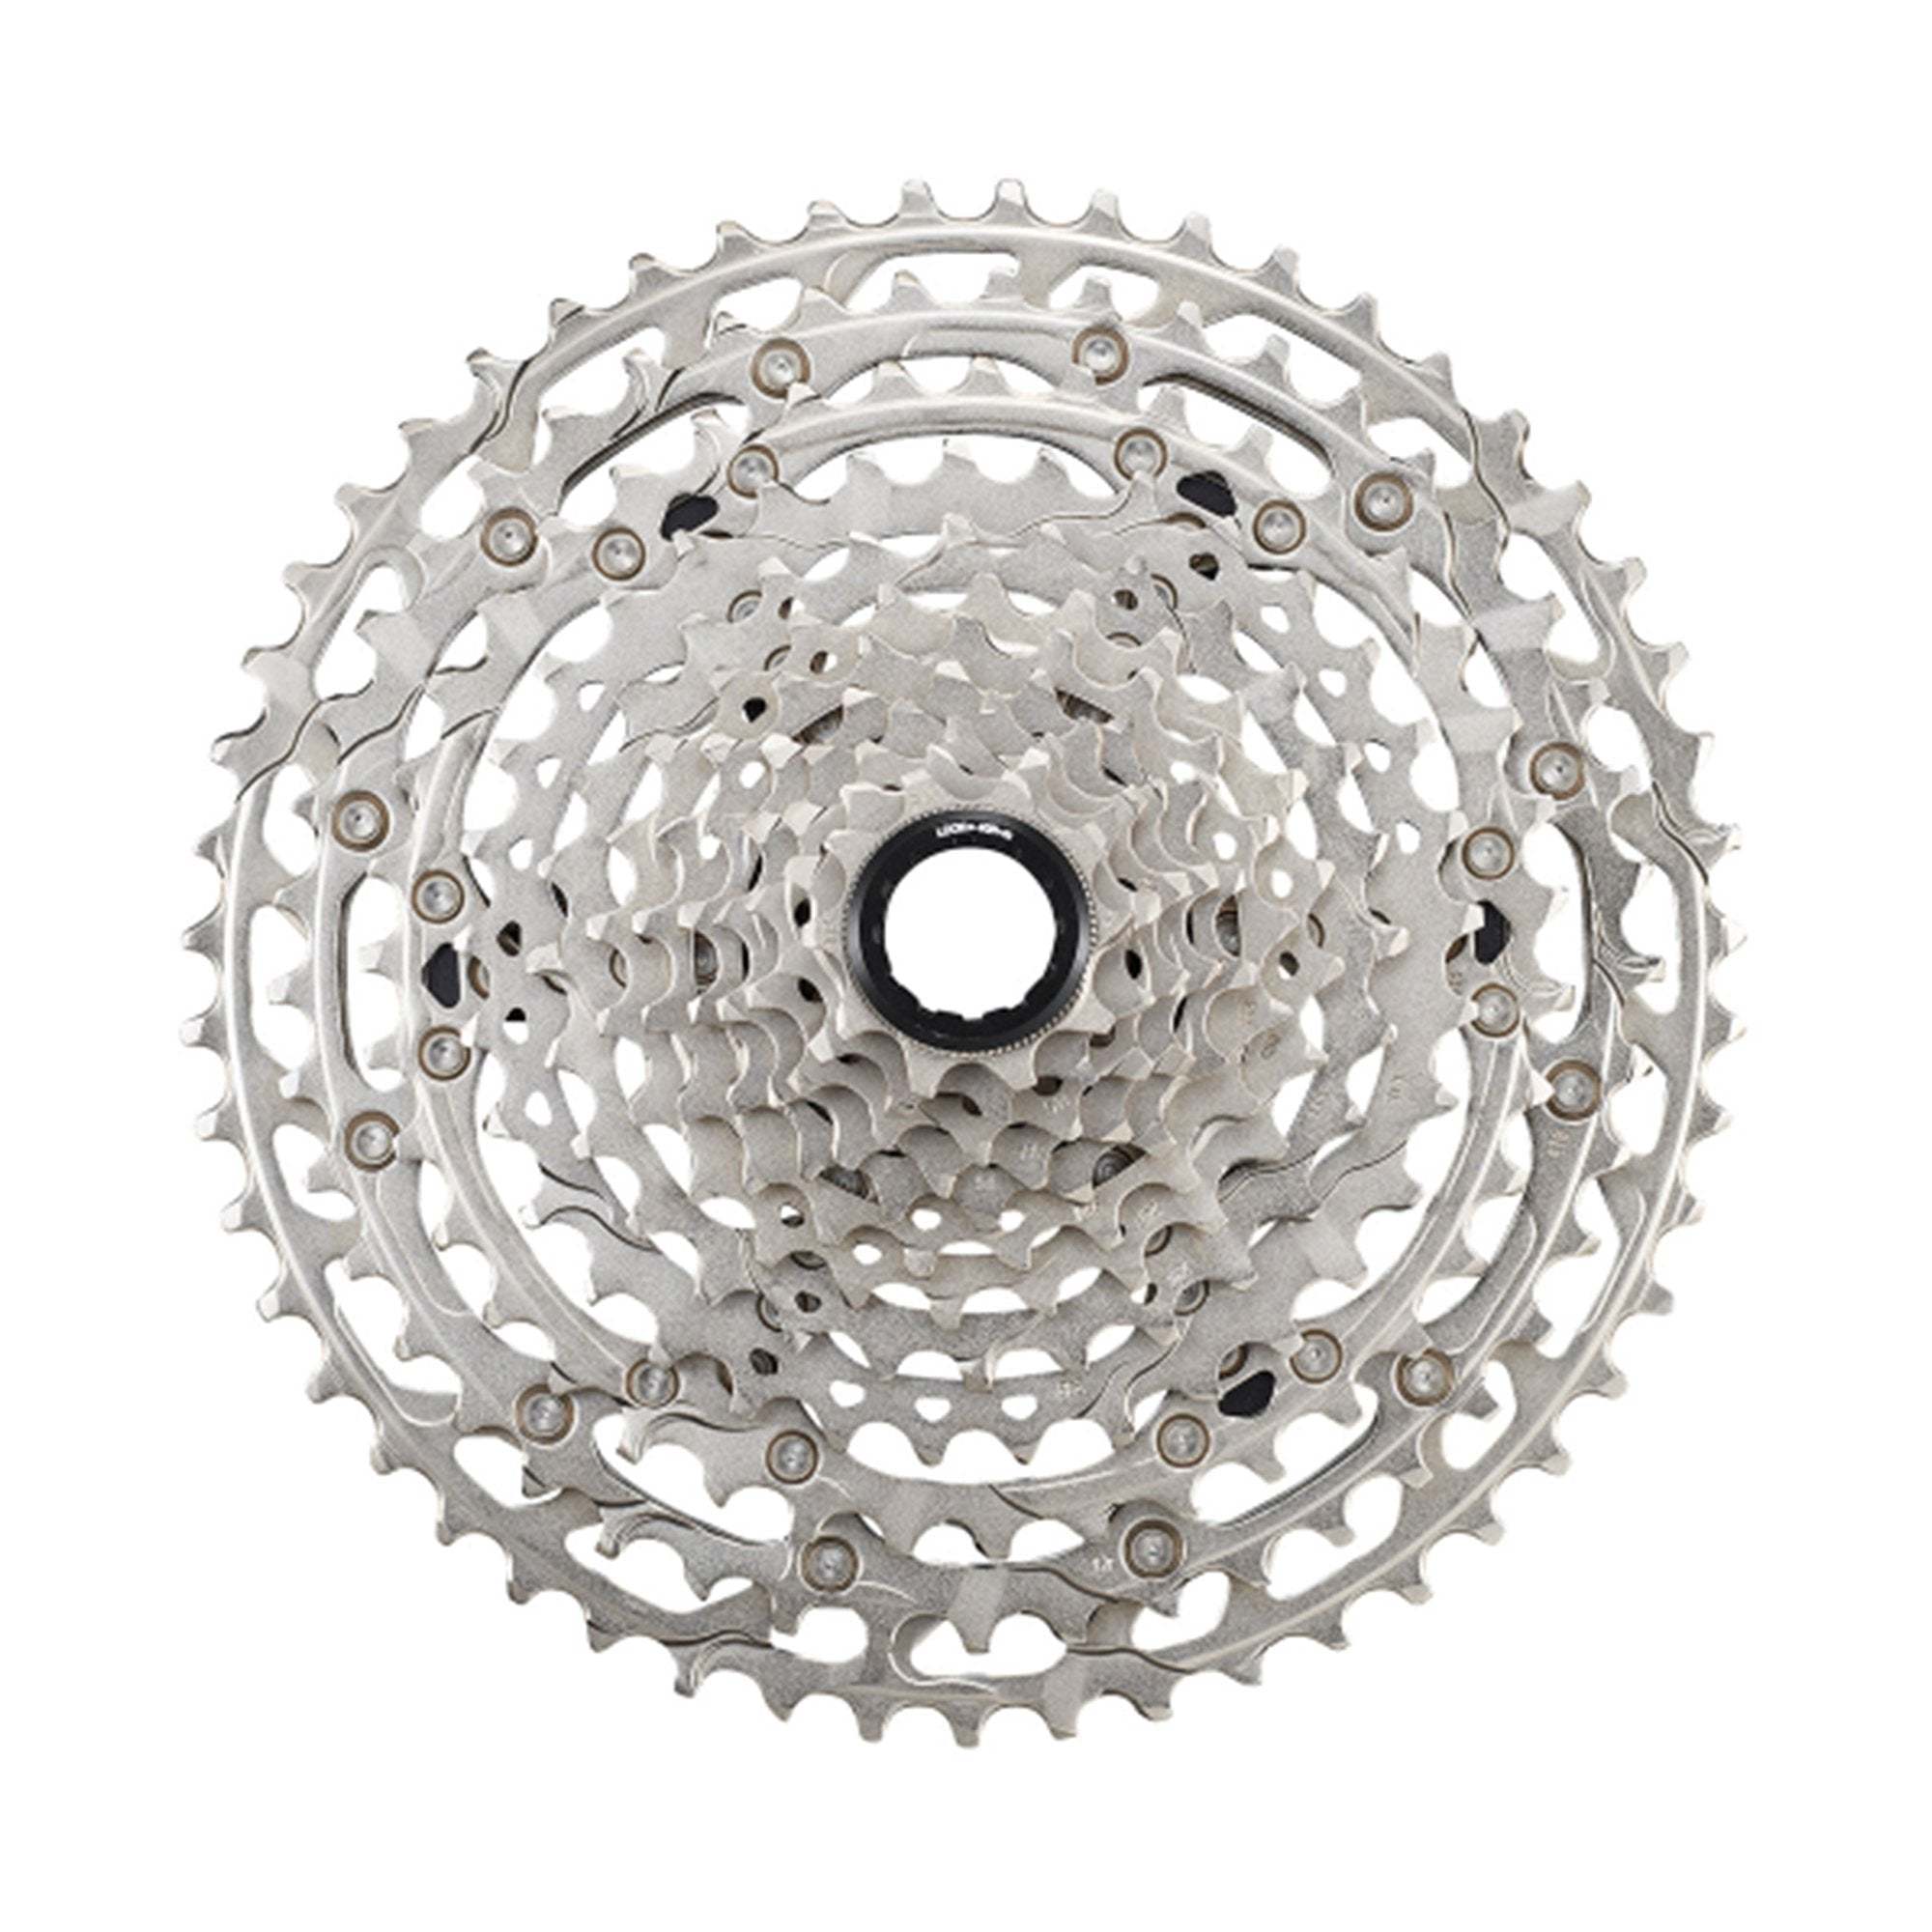 Shimano Deore M6100 12Speed Cassette 10-51